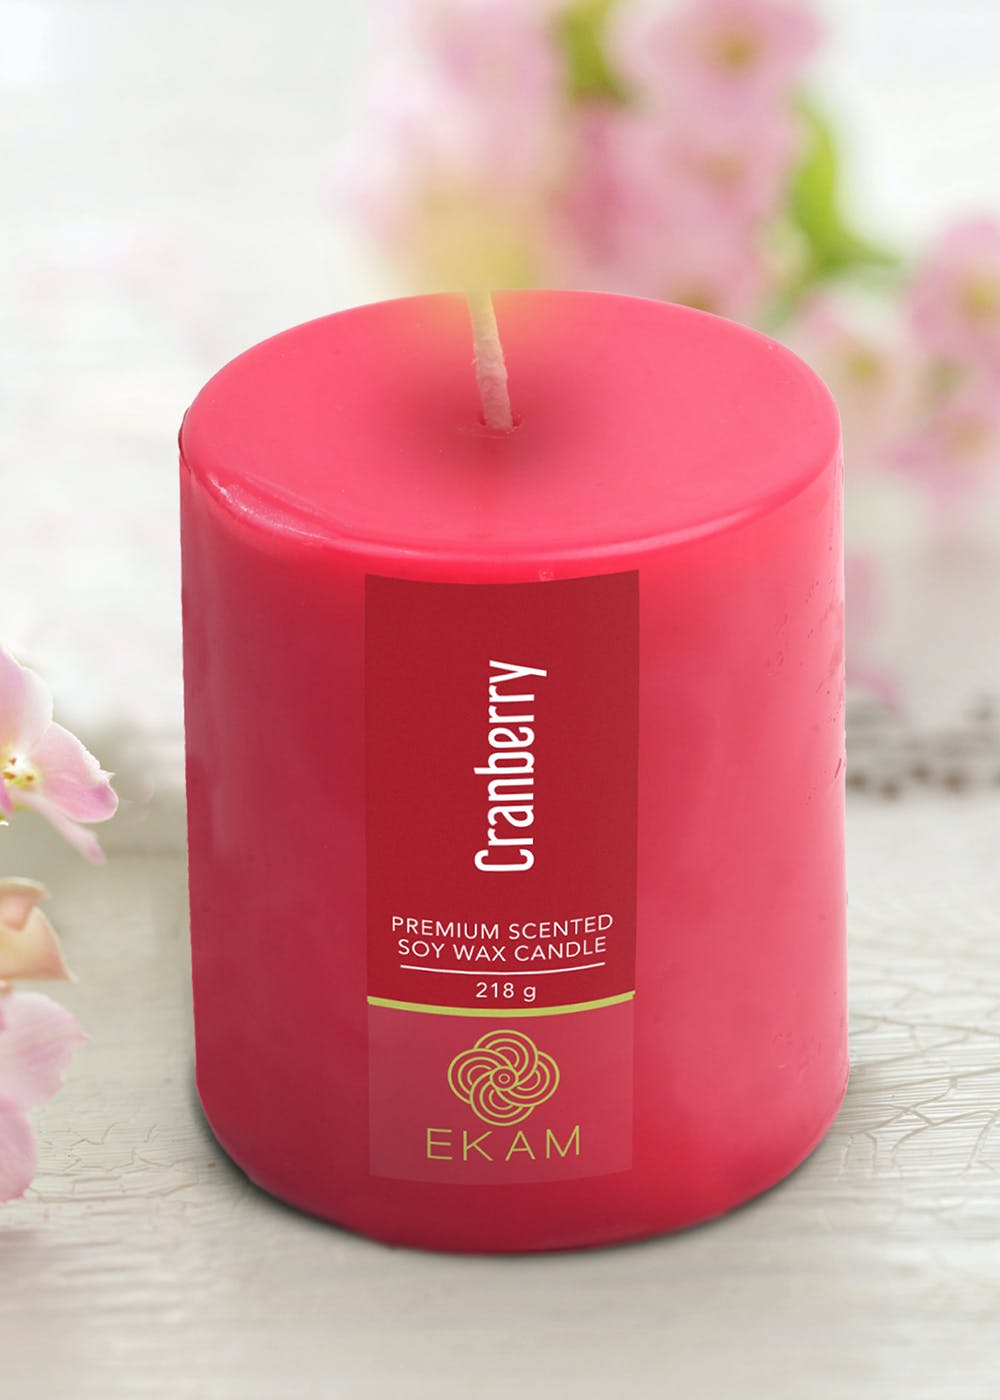 Cranberry Pillar Soy Wax Scented Candle